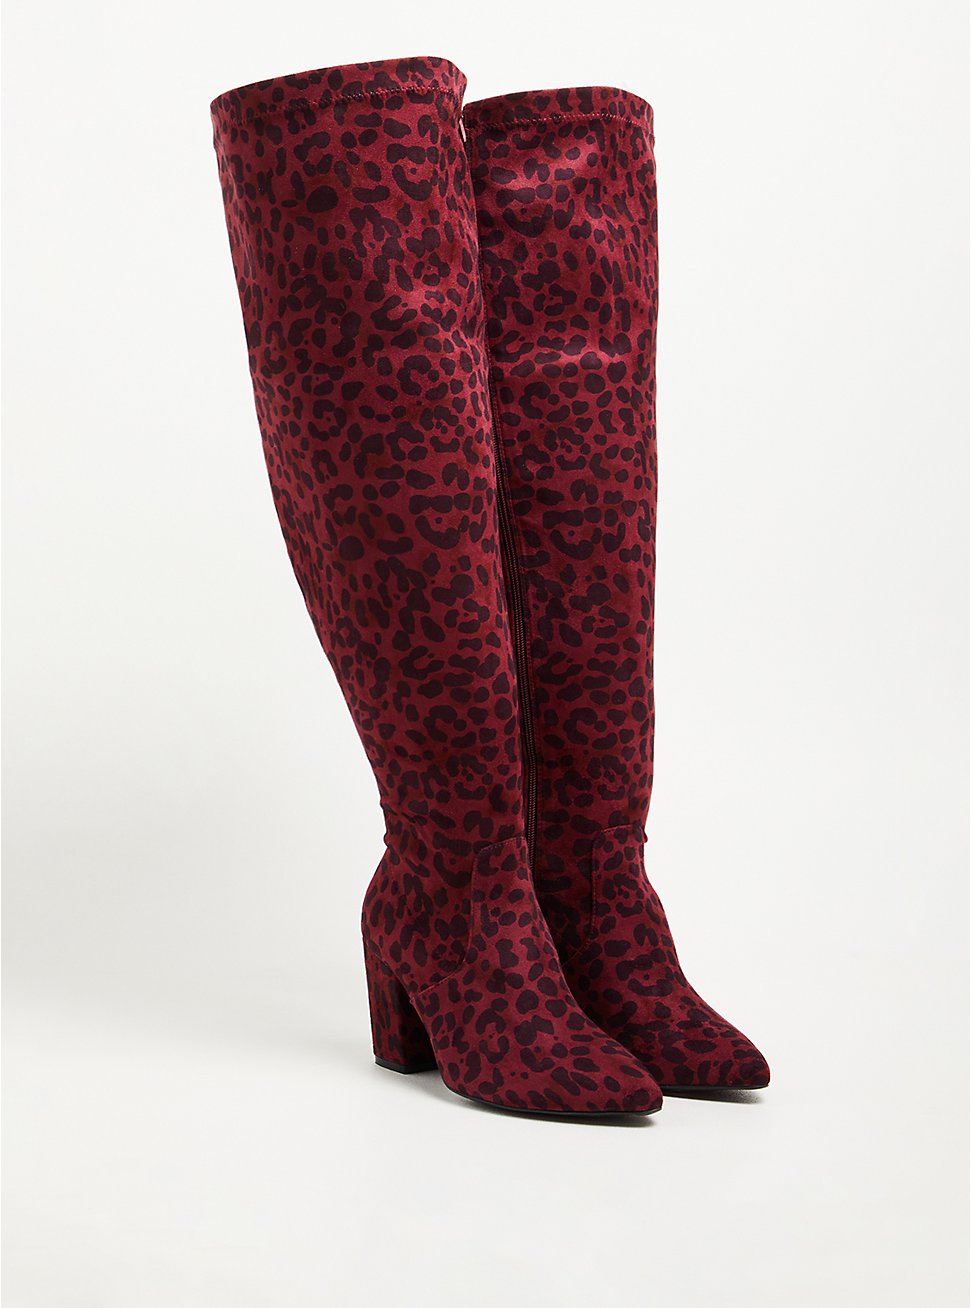 Plus Size Over The Knee Boot - Faux Suede Stretch Burgundy (WW), BURGUNDY, hi-res